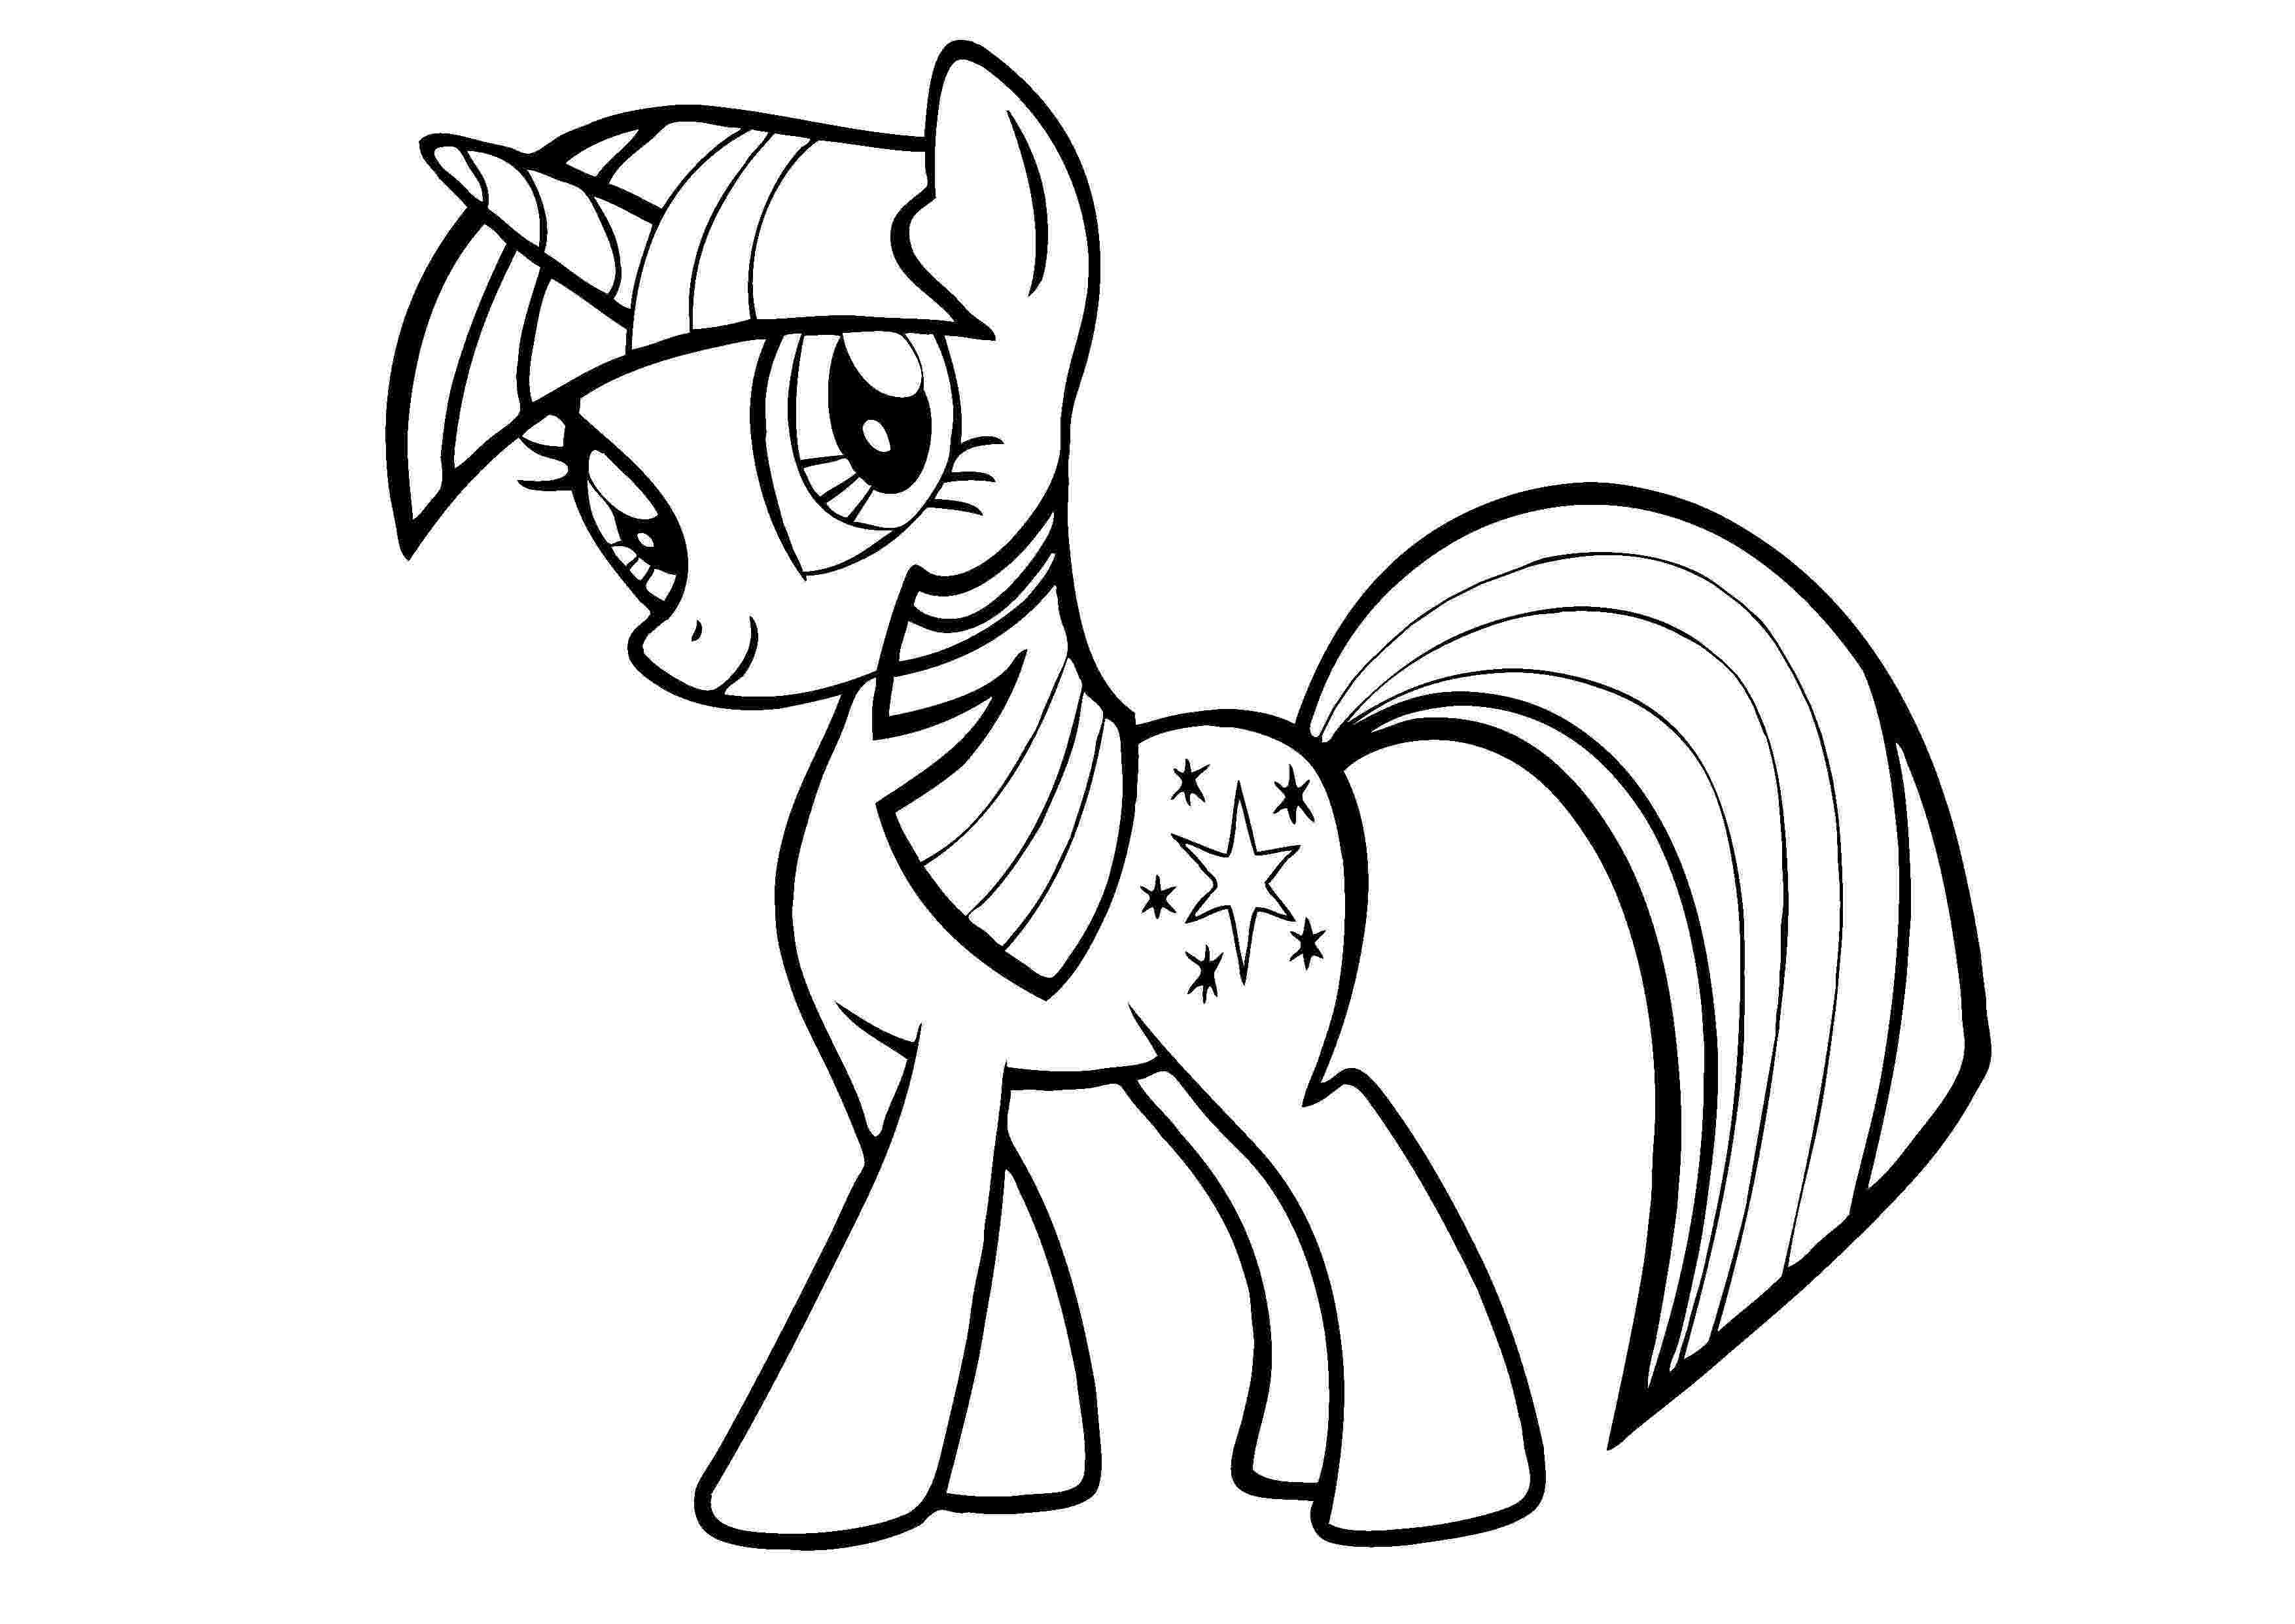 my little pony coloring pages free printable free printable my little pony coloring pages for kids printable coloring free my pages little pony 